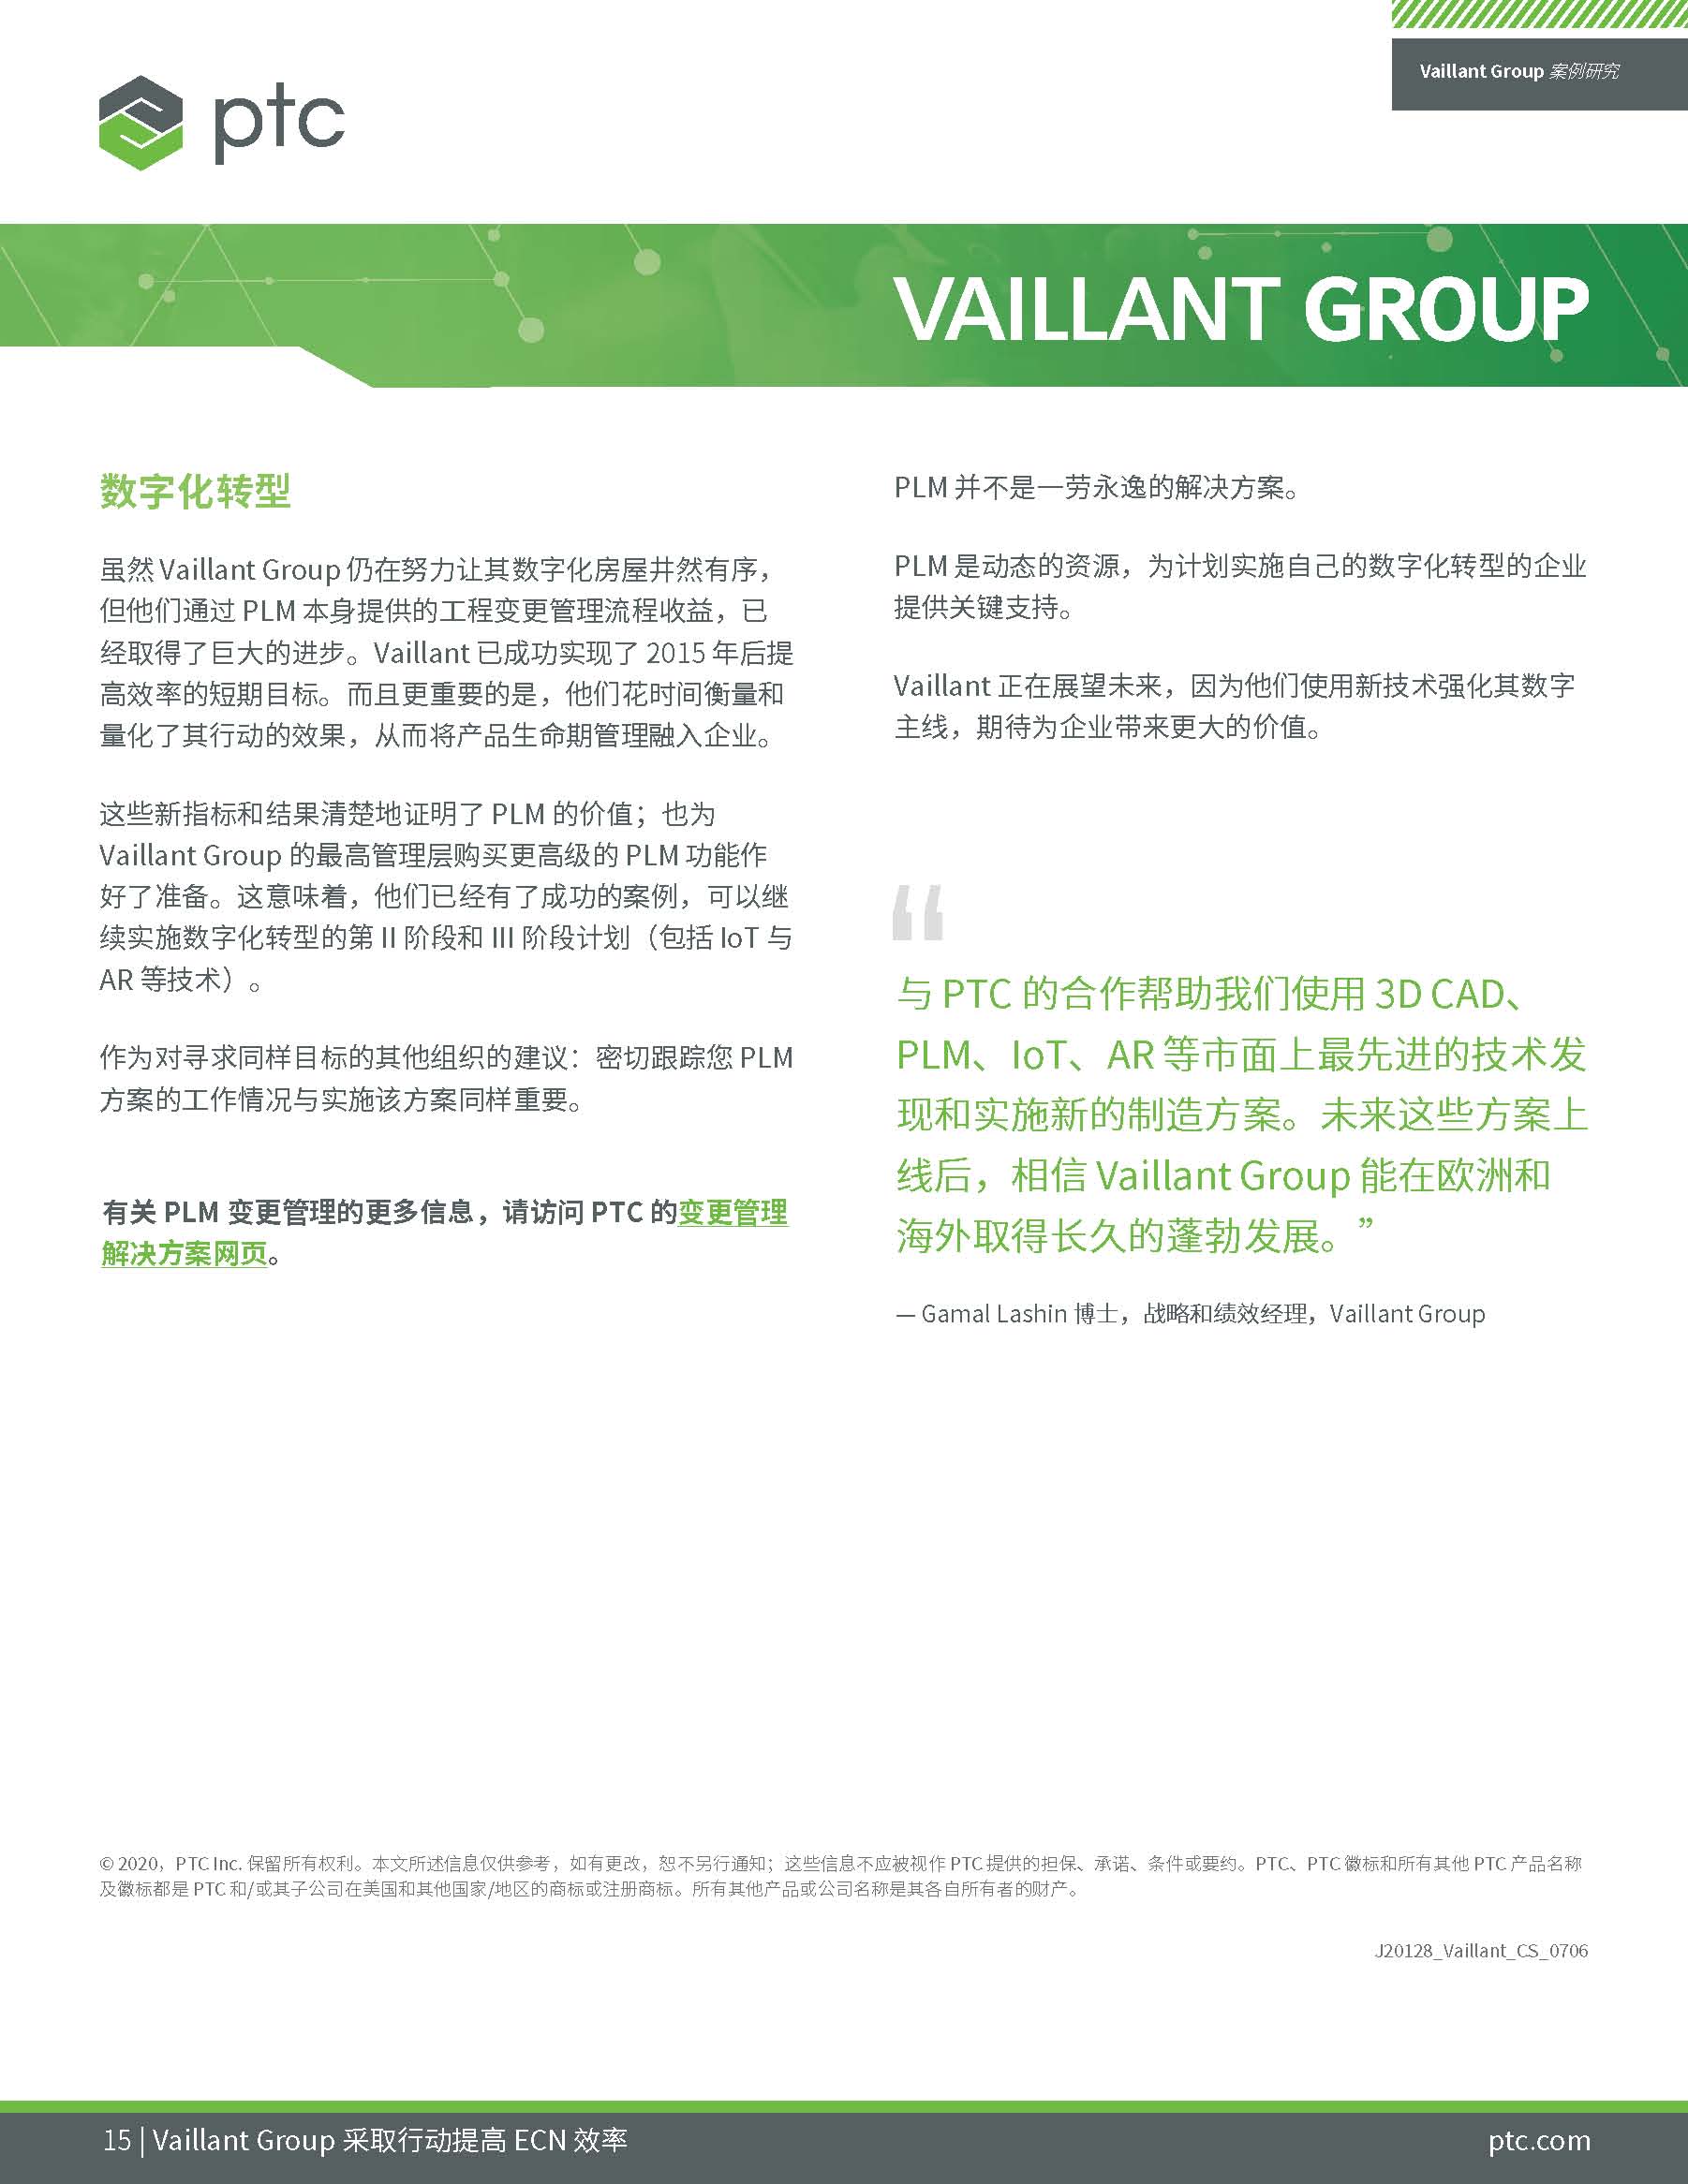 Vaillant Group's Digital Transformation (Chinese)_页面_15.jpg